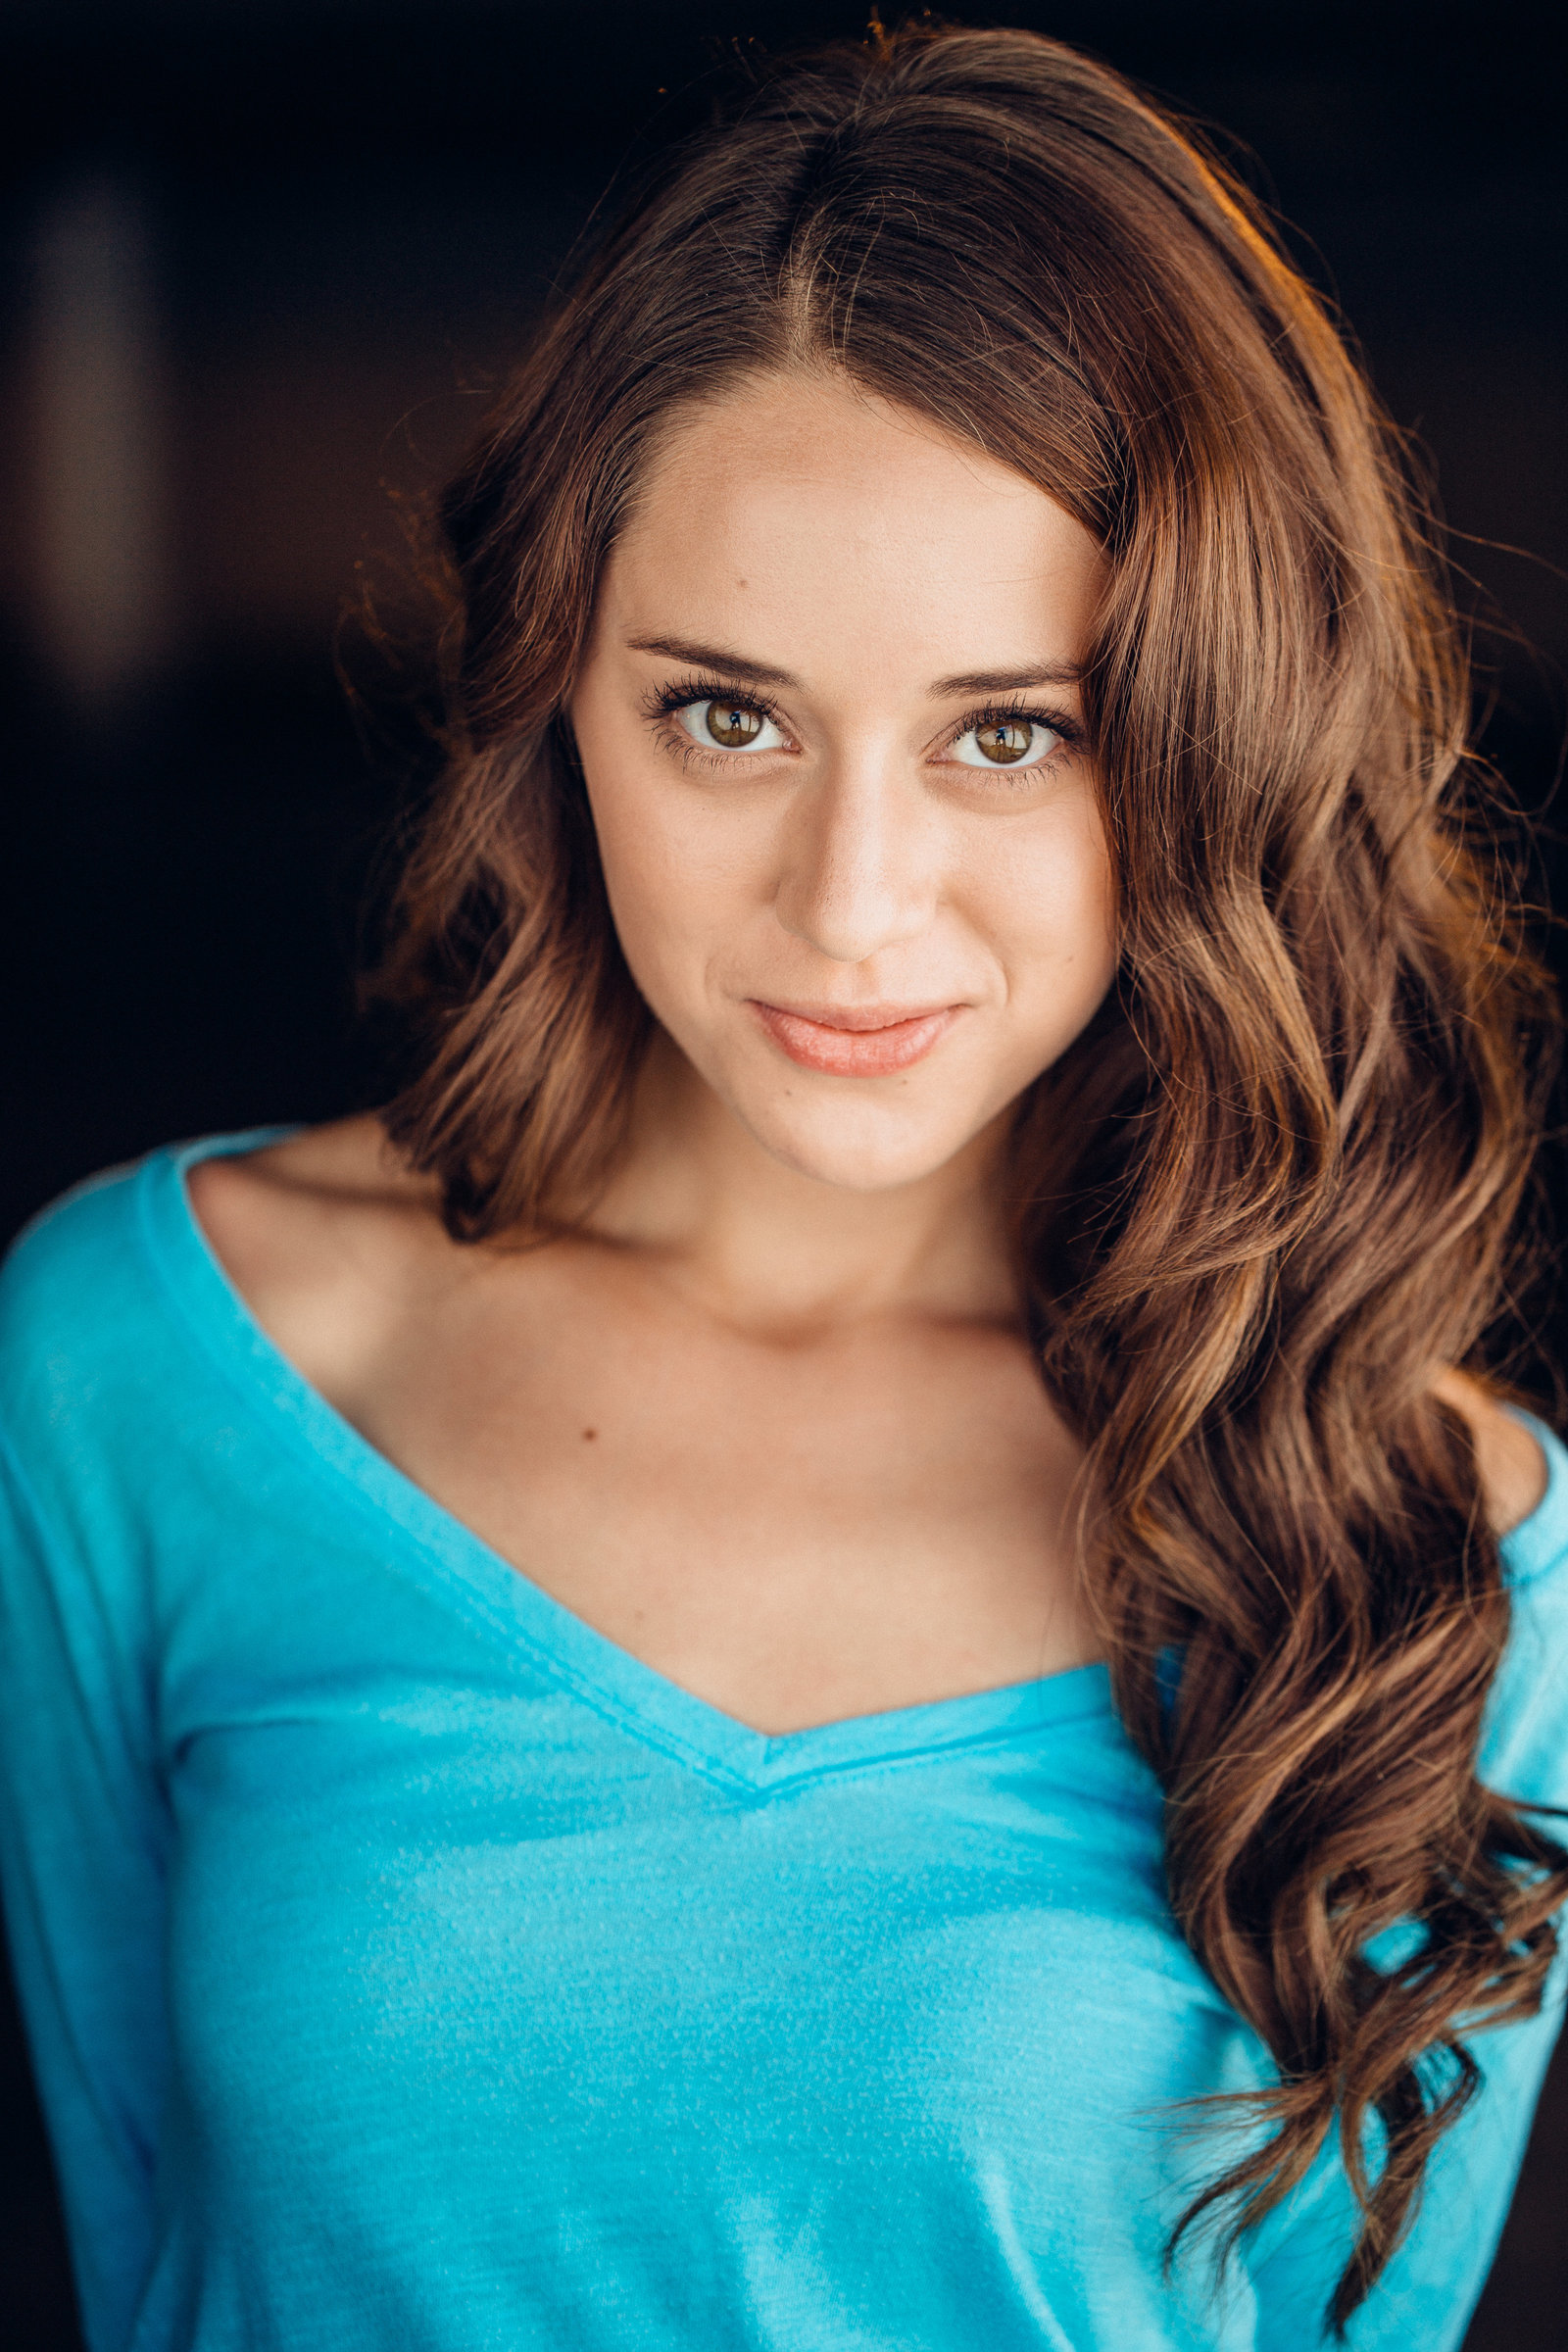 Headshot Photo Of Young Woman In Sky Blue Off-Shoulder Blouse